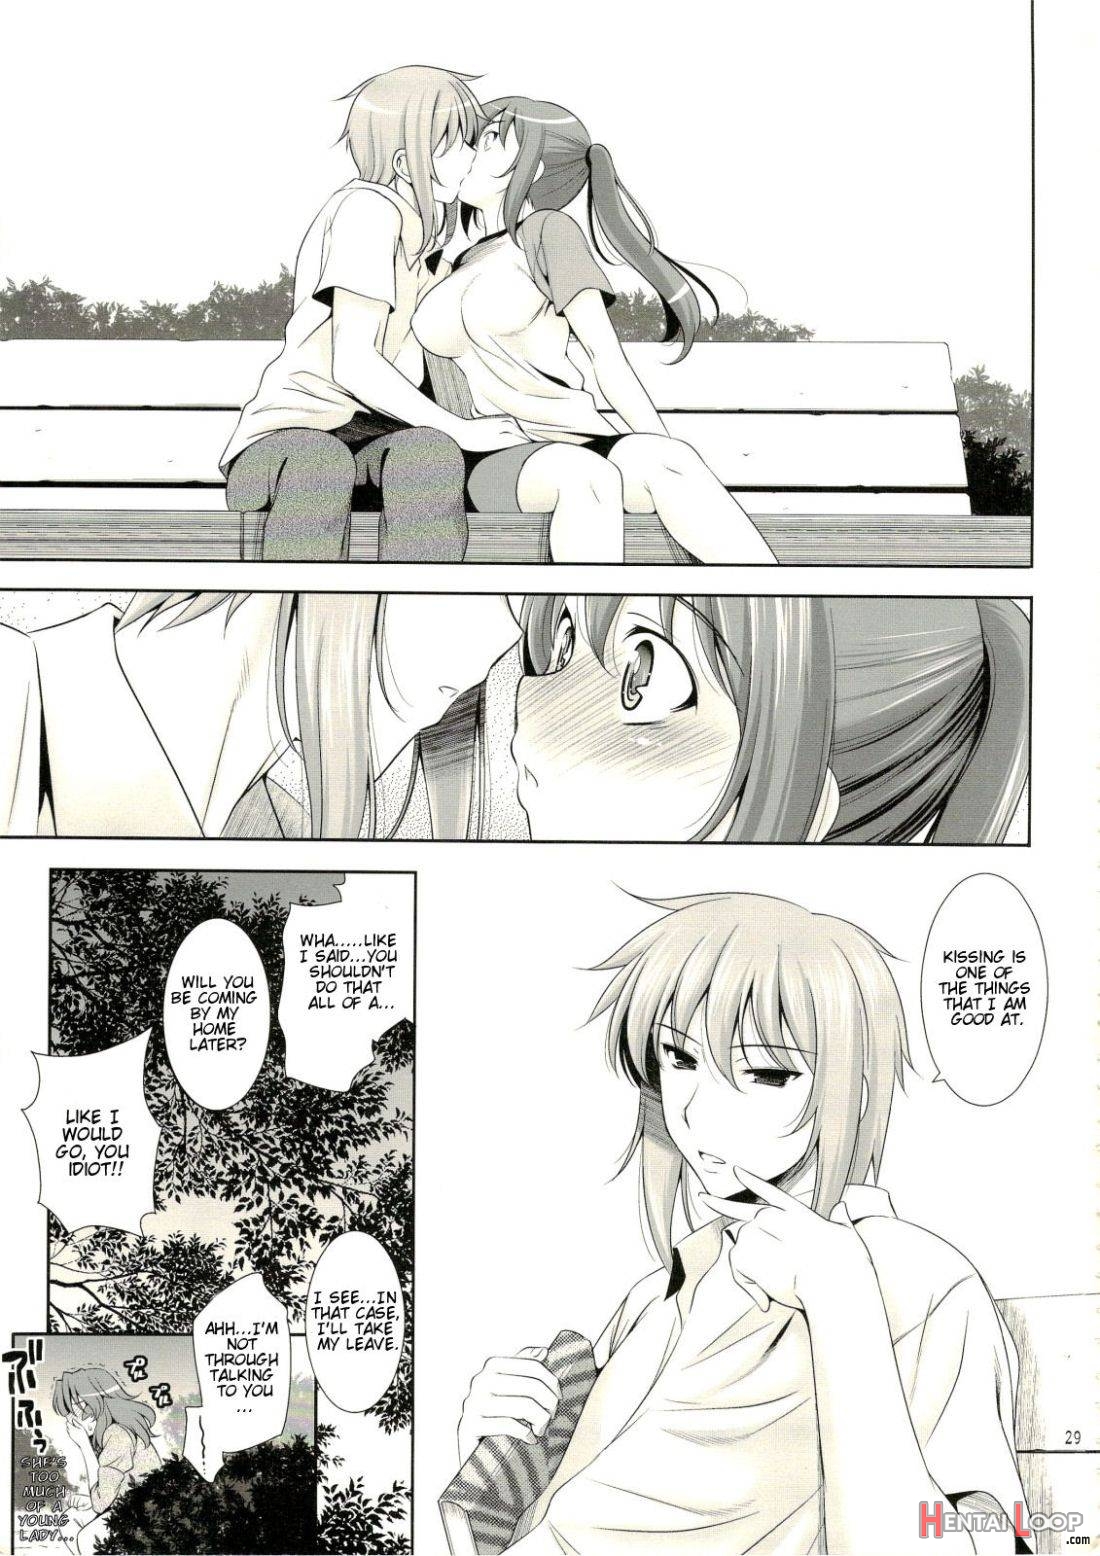 Manatsu no Yo no Yume no Mata Yume no Mata Yume page 26